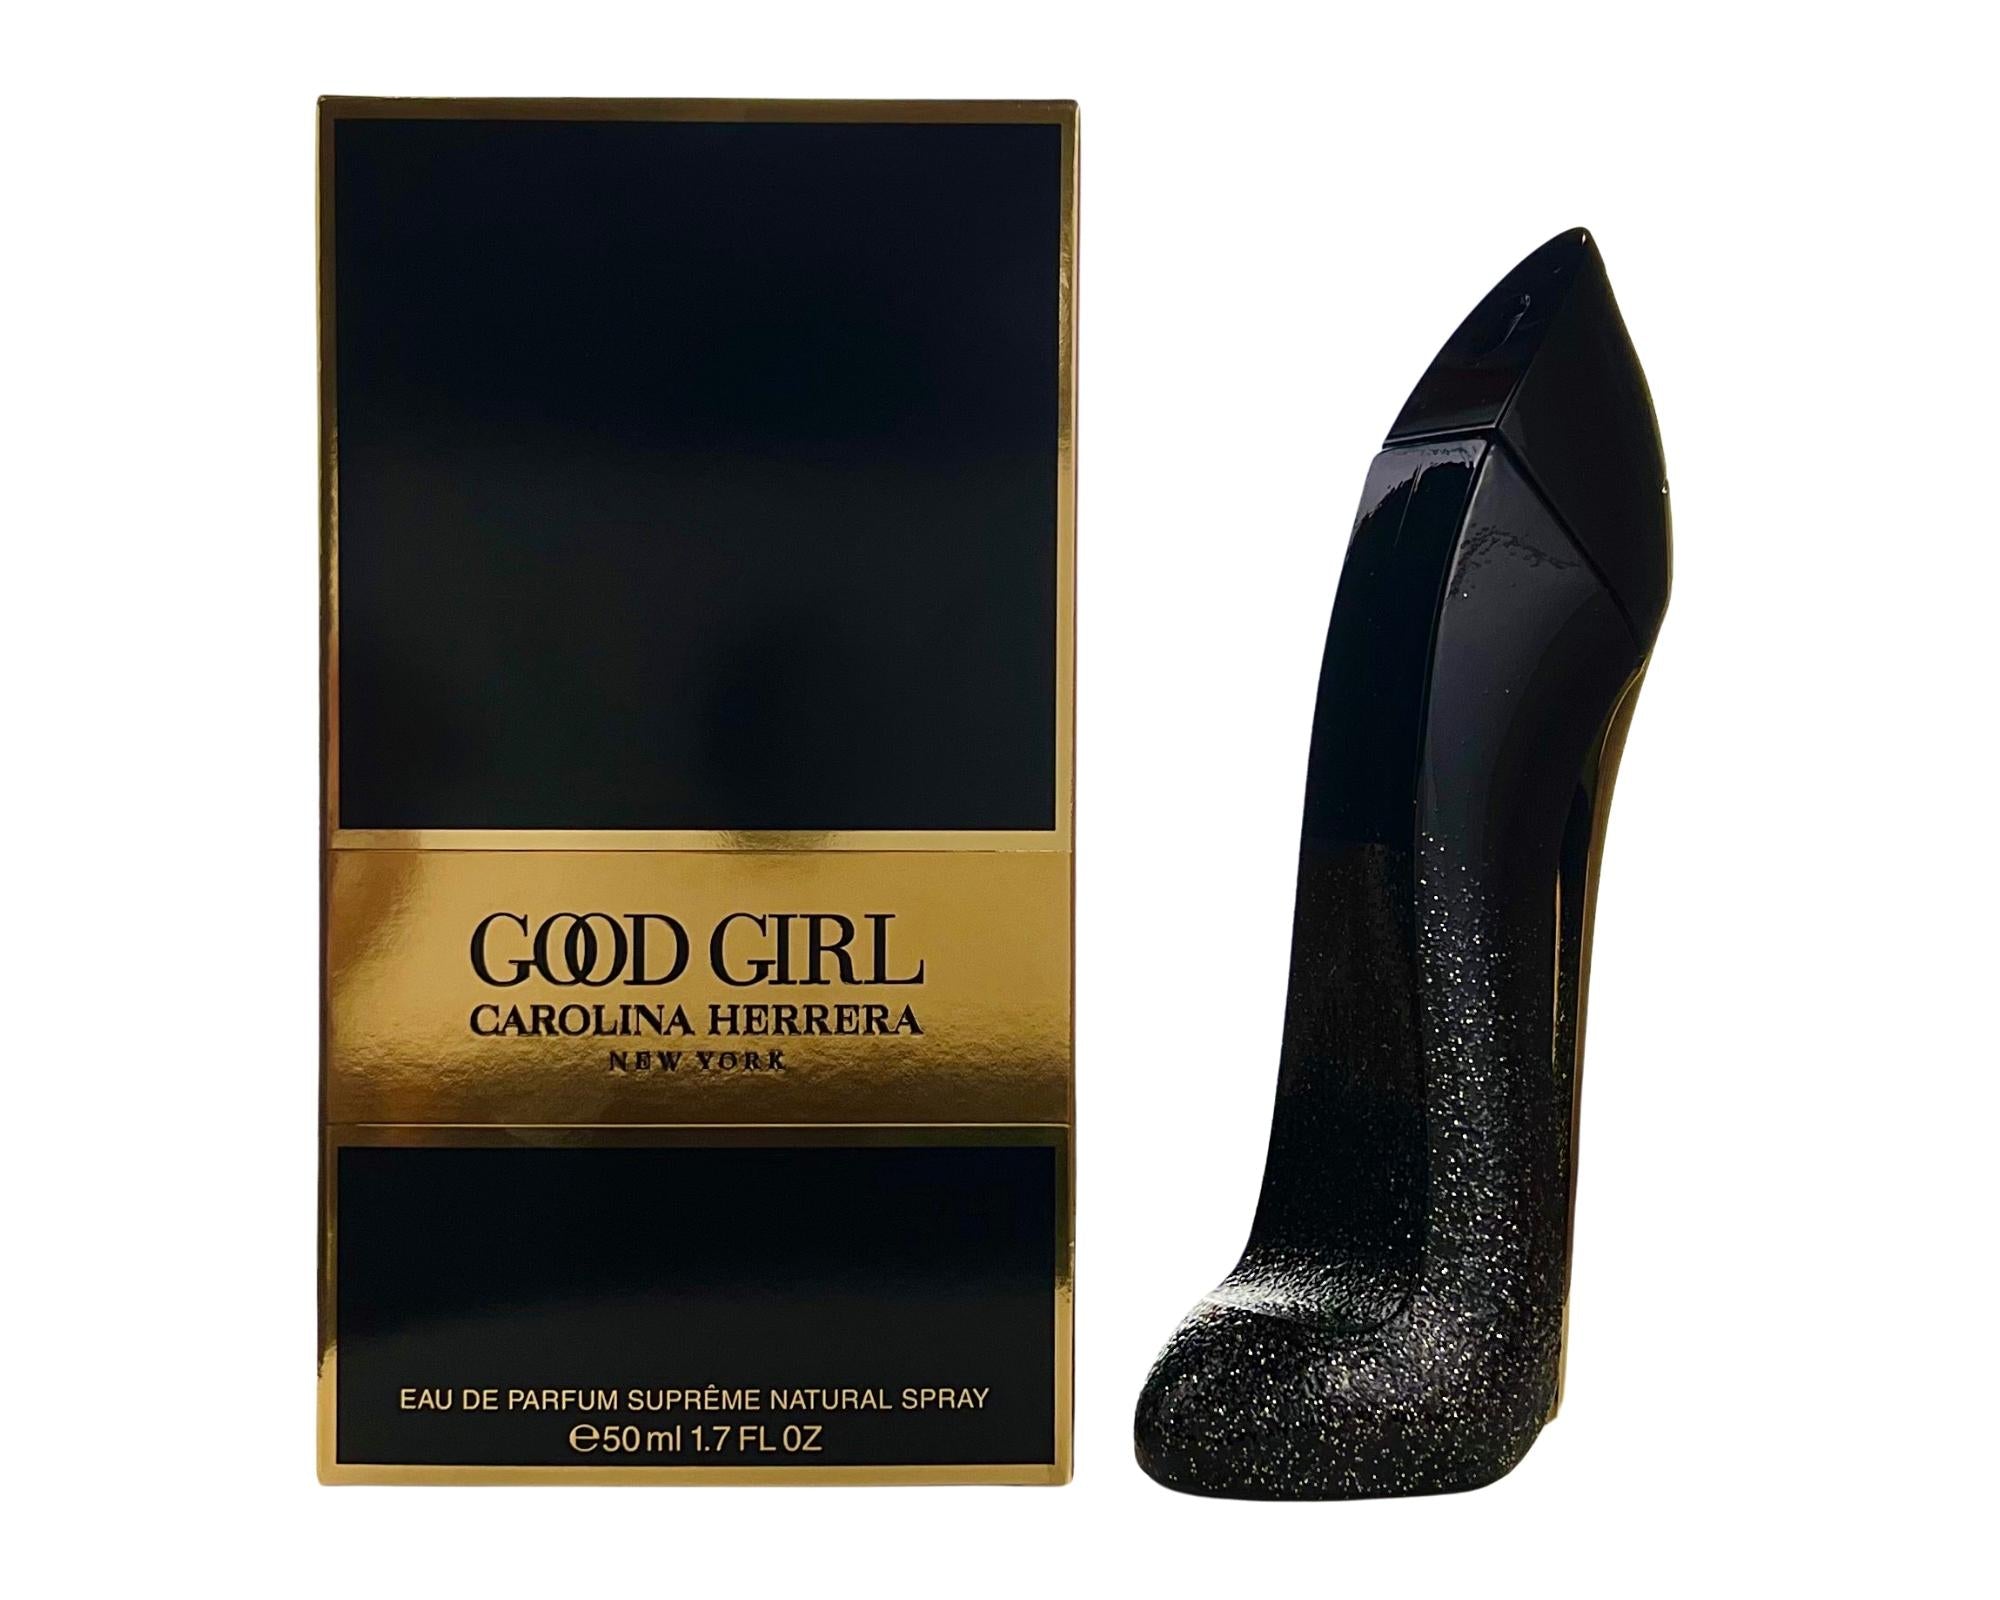 Shop for samples of Good Girl Supreme (Eau de Parfum) by Carolina Herrera  for women rebottled and repacked by